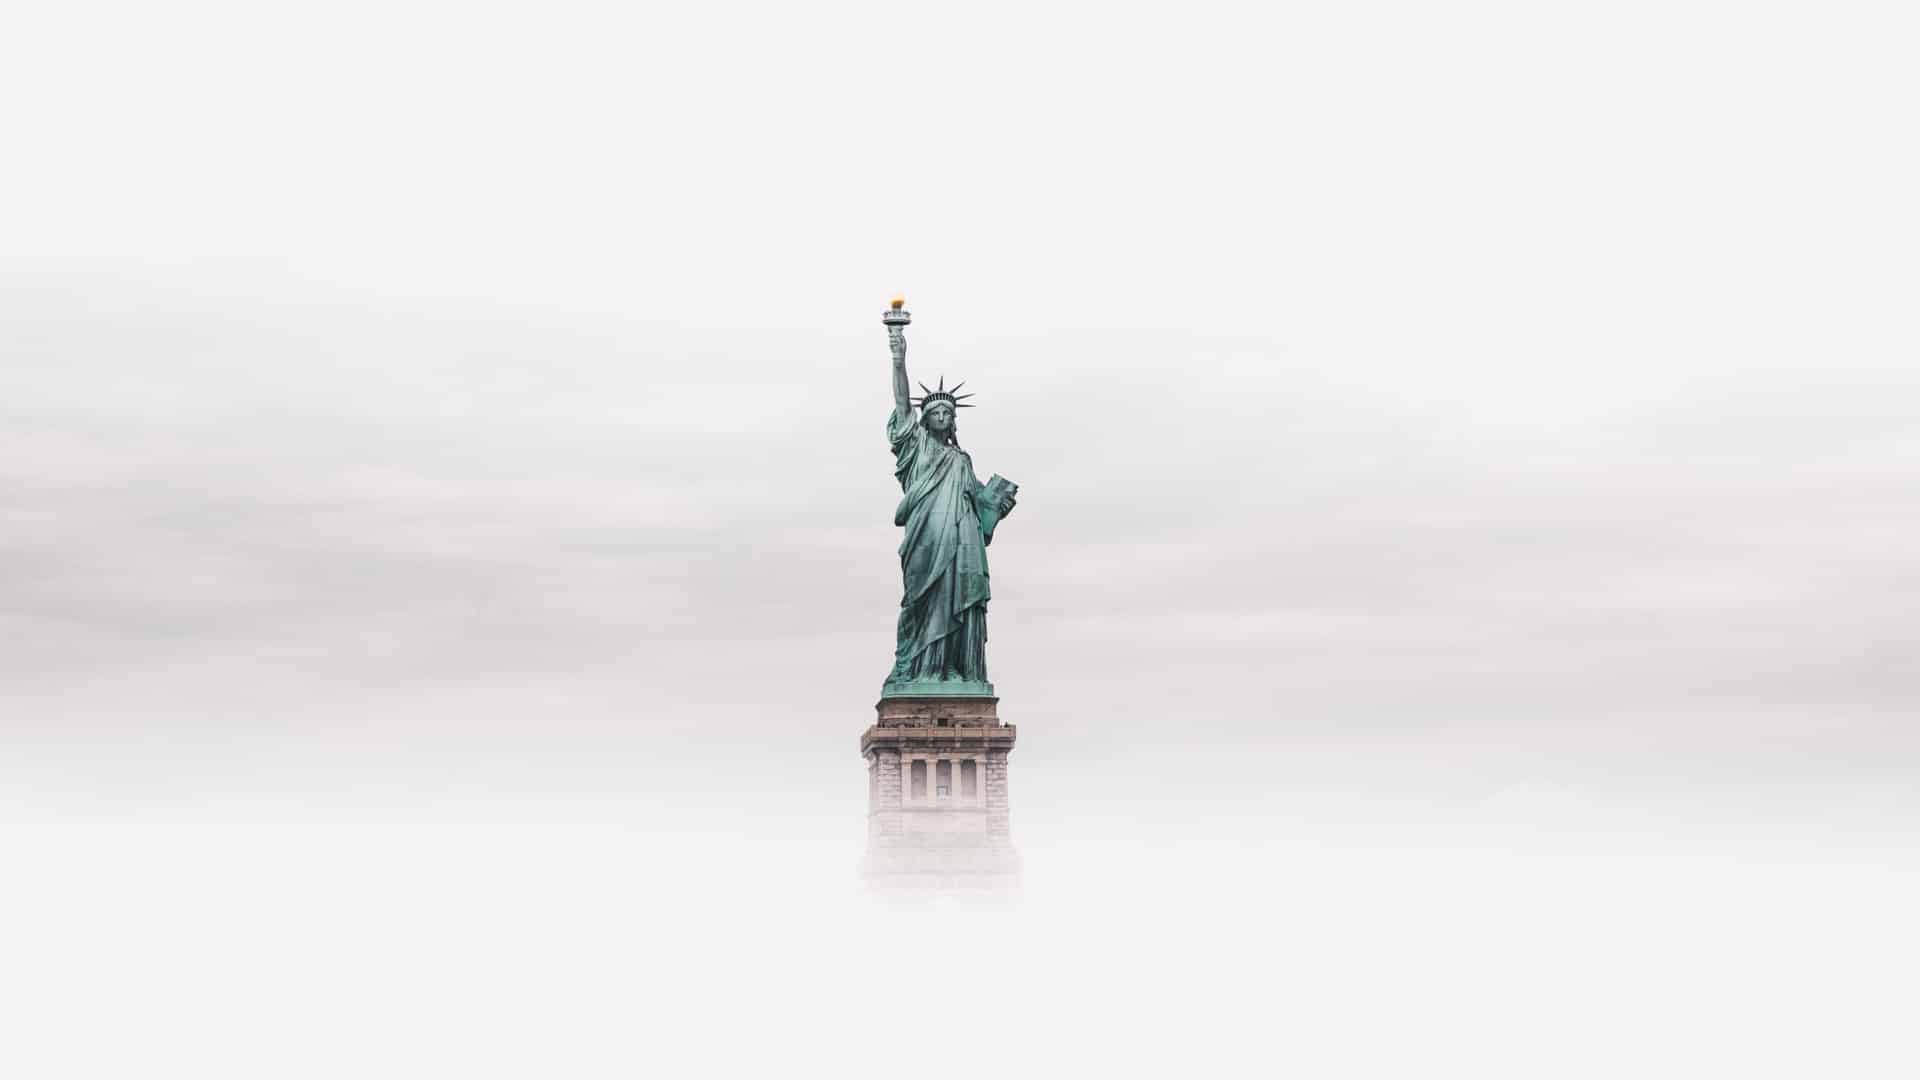 Statue of Liberty surrounded by fog